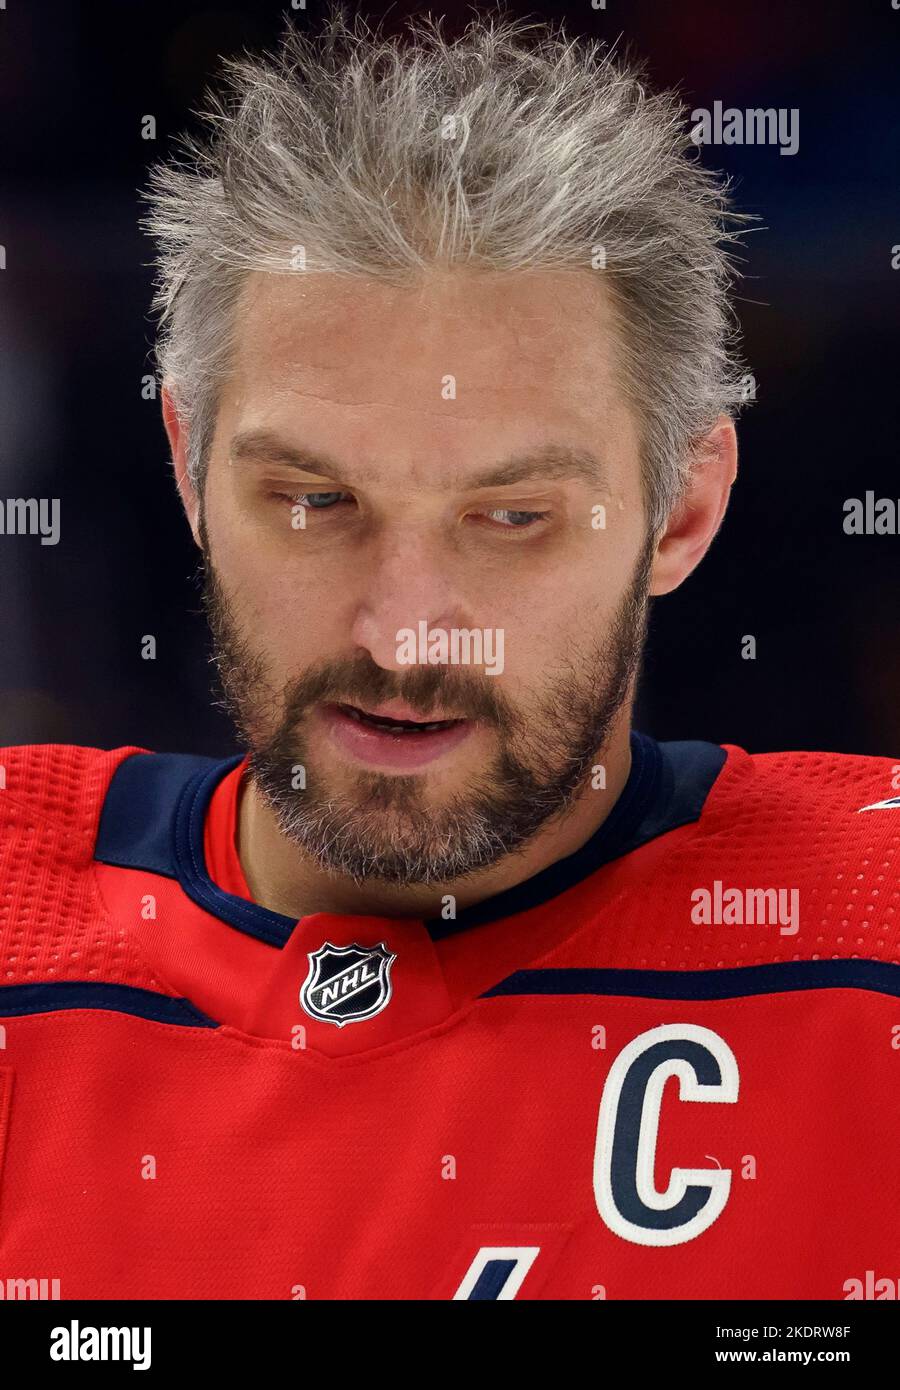 Russian ice hockey star AlexAlex Ovechkin skates before a game Stock Photo